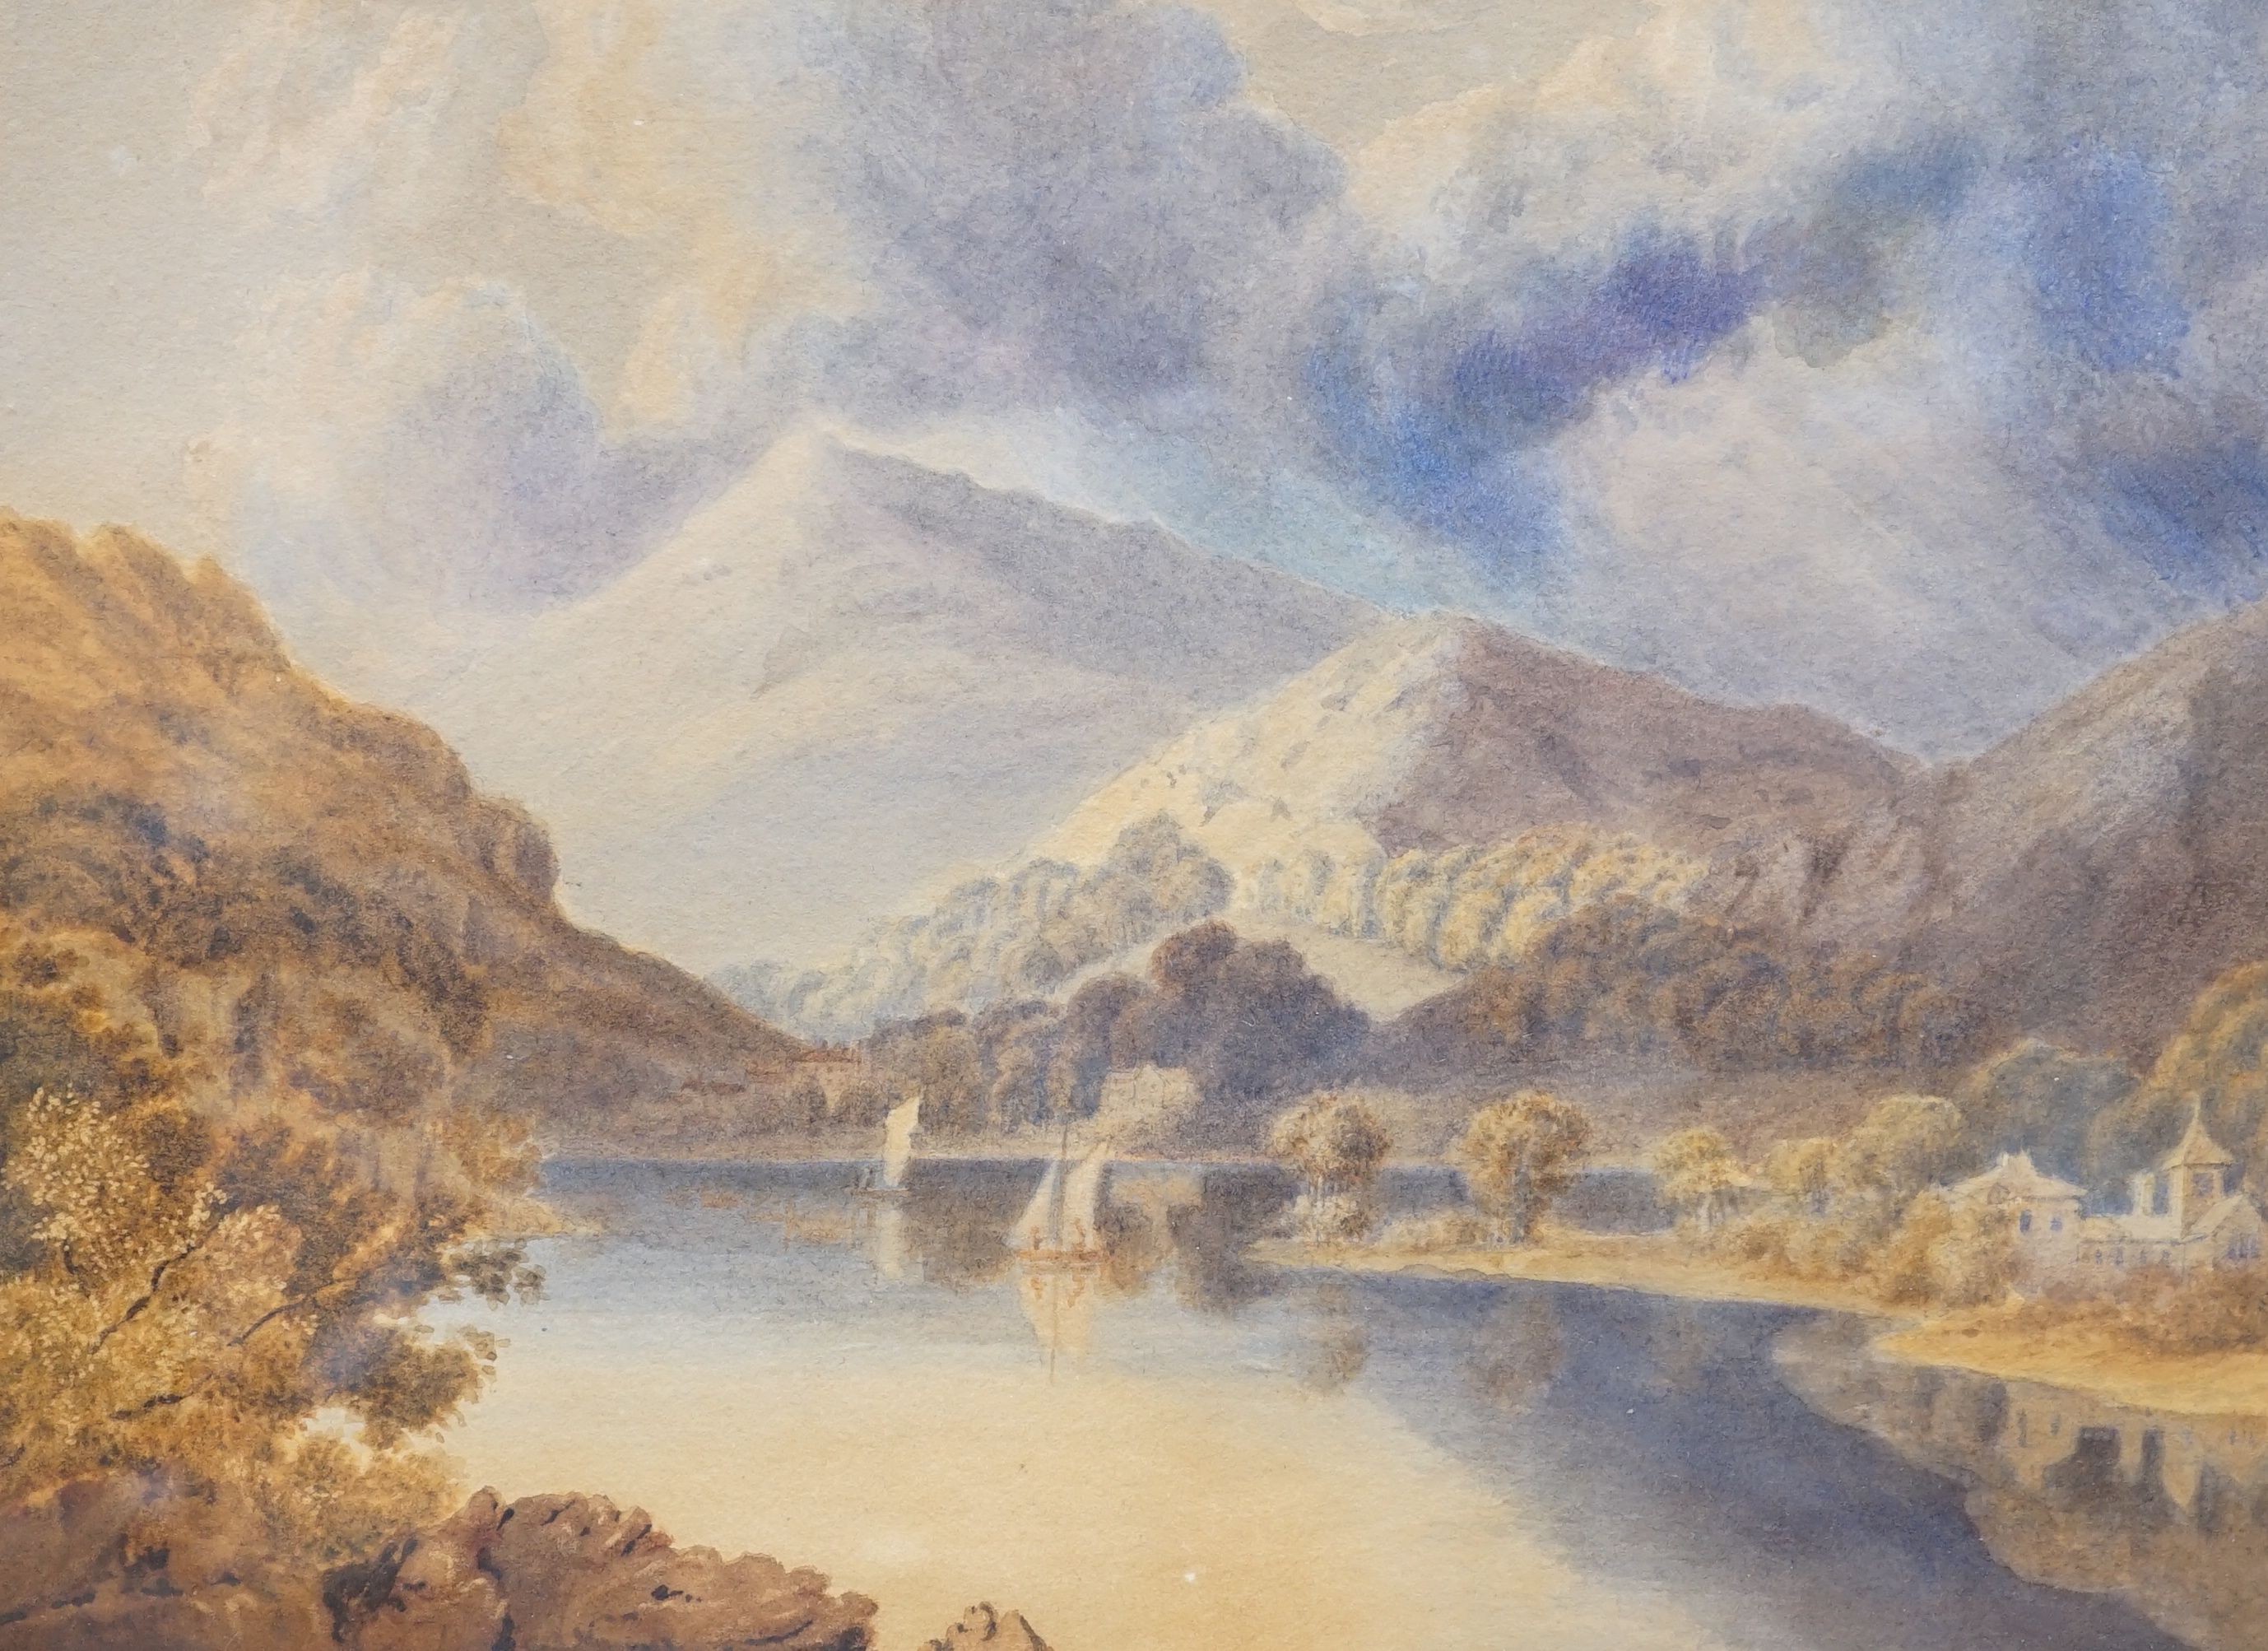 Attributed to George Fennel Robson (1788-1833), Lakeland view with small sailing boats, pen and watercolour, 19 x 25.5cm